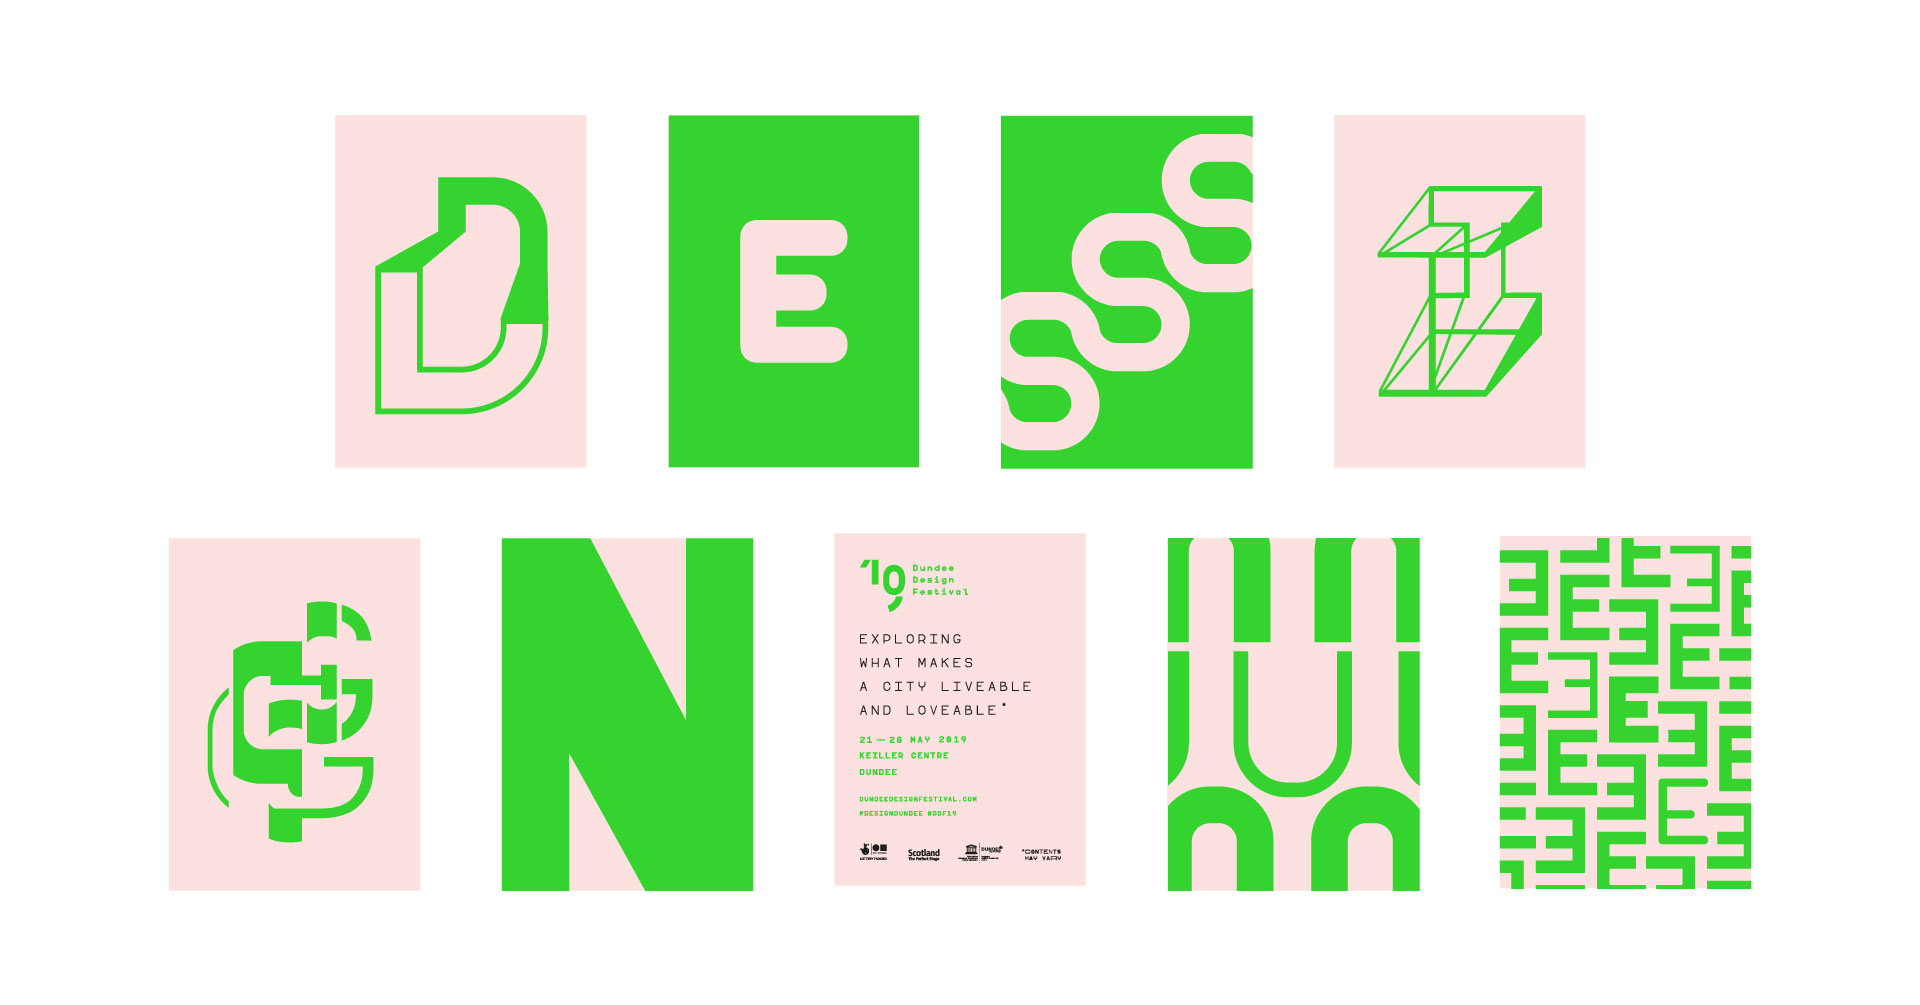 Pink and green flyers to advertise 2019 Dundee Design Festival each with a graphical treatment of letters that spell out Dundee and Design.